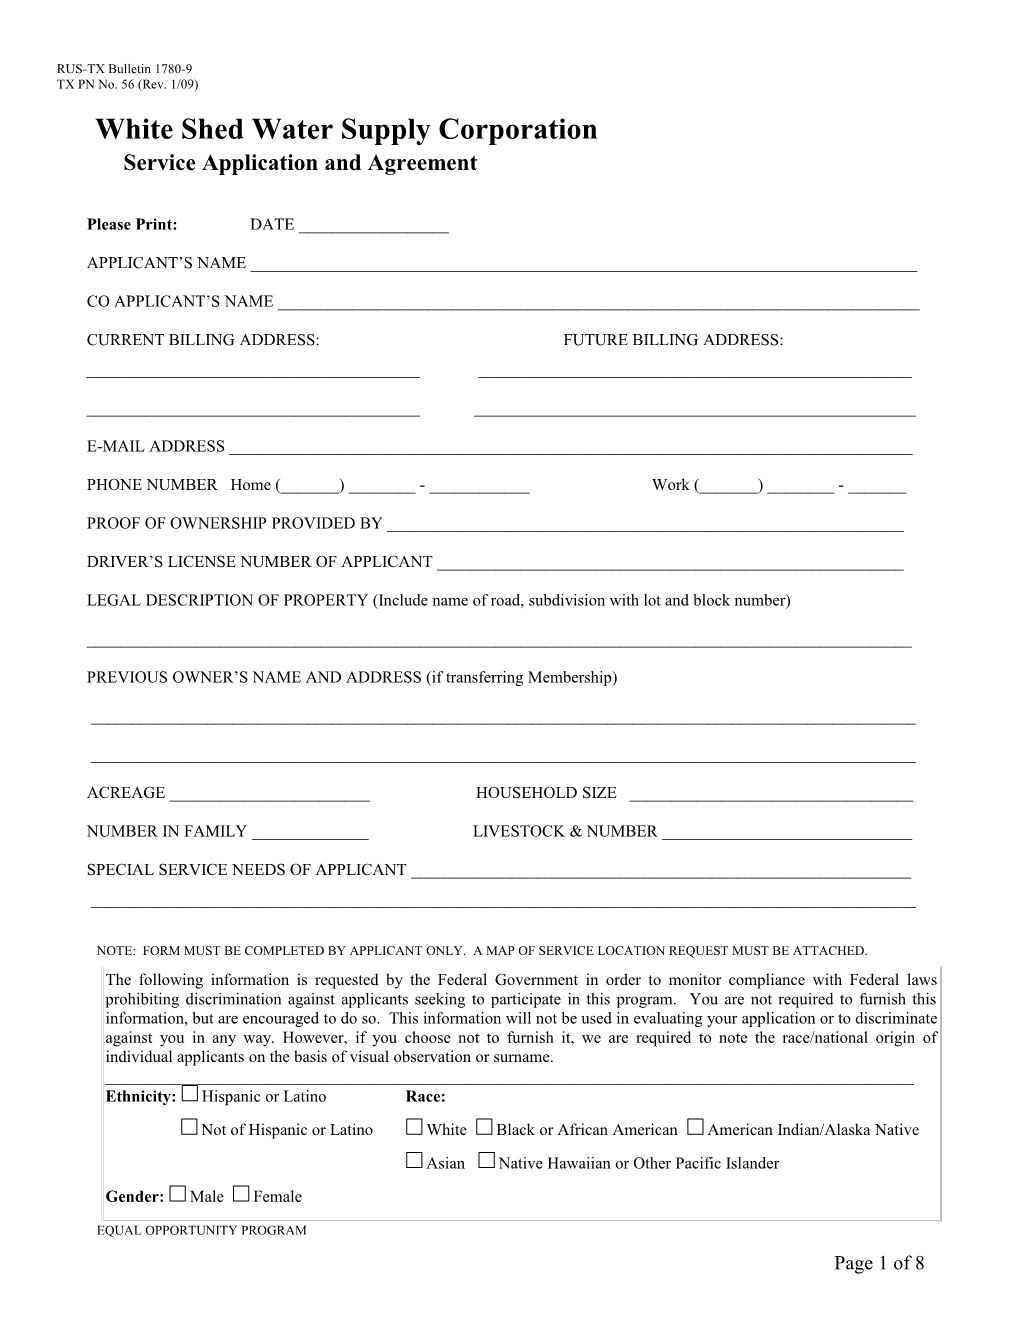 RUS-TX Bulletin 1780-9 Service Application and Agreement